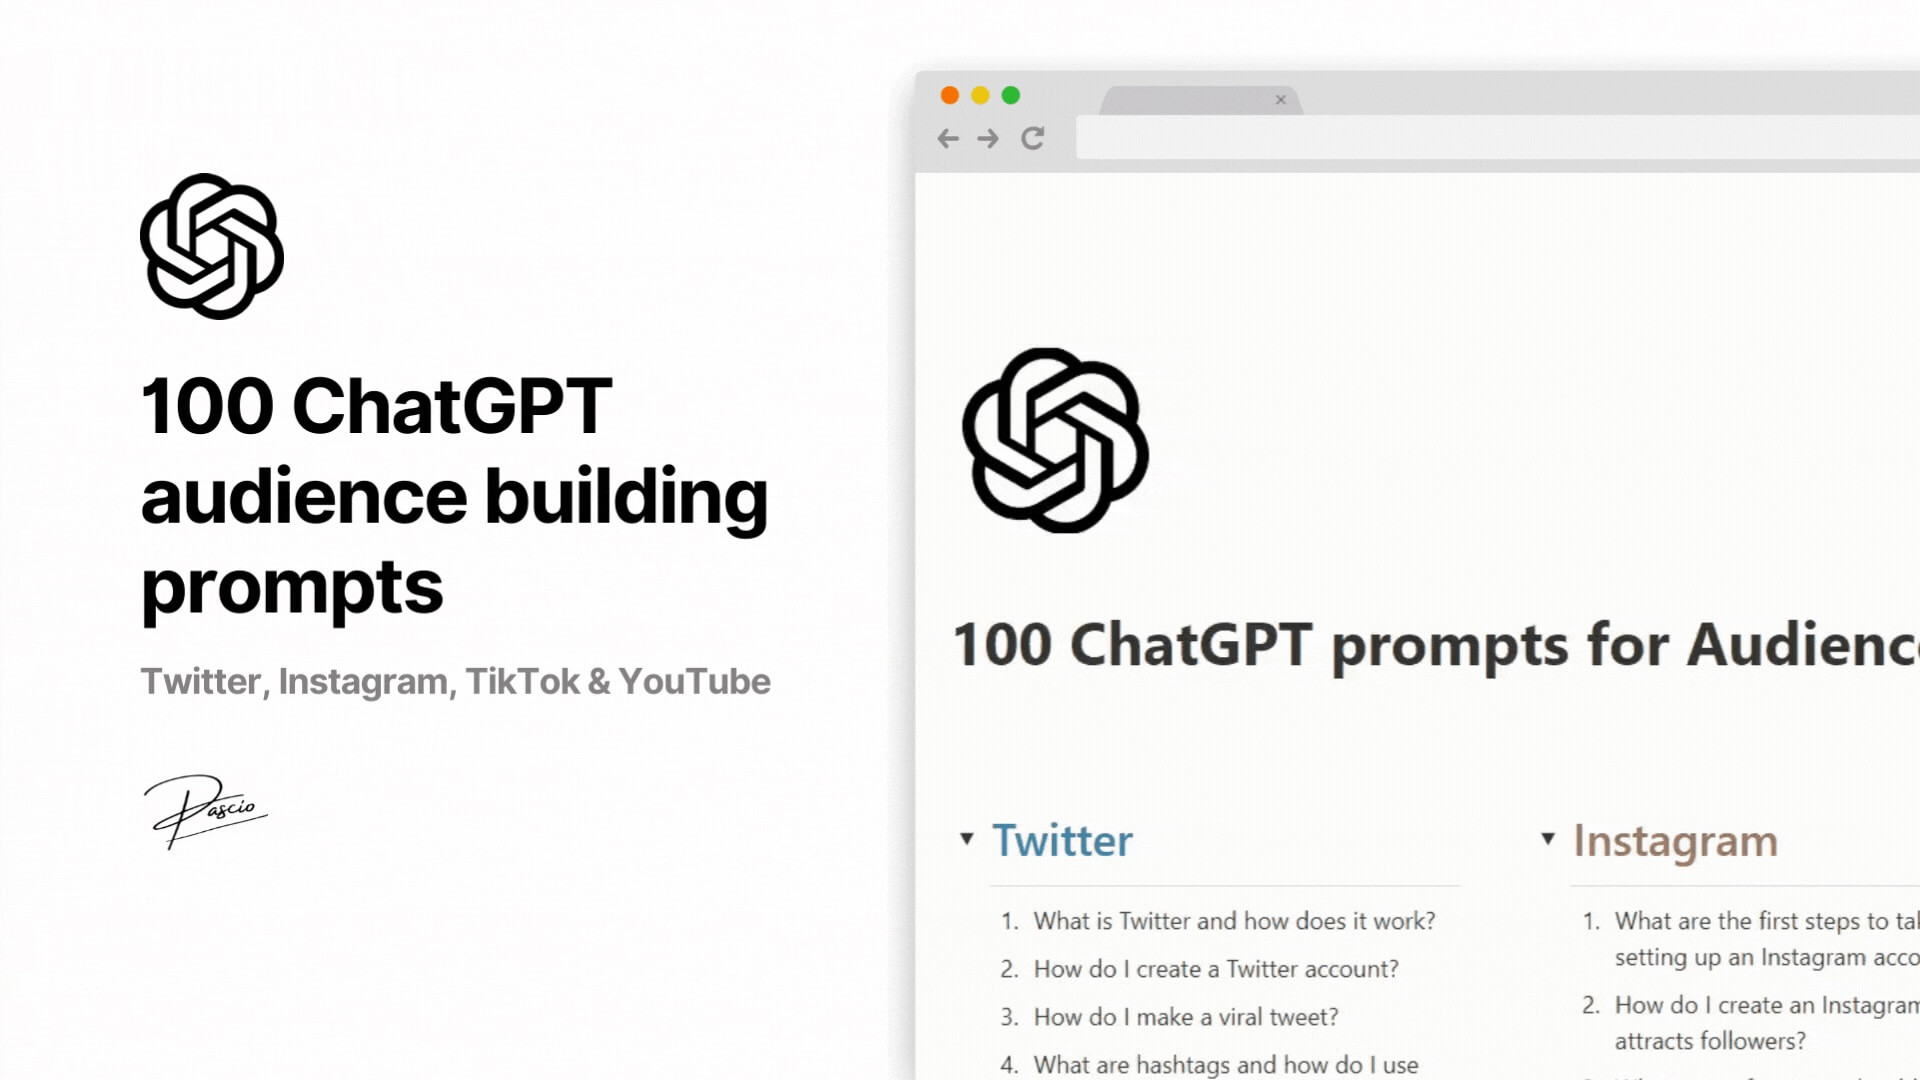 400 ChatGPT prompts for audience building.jpg